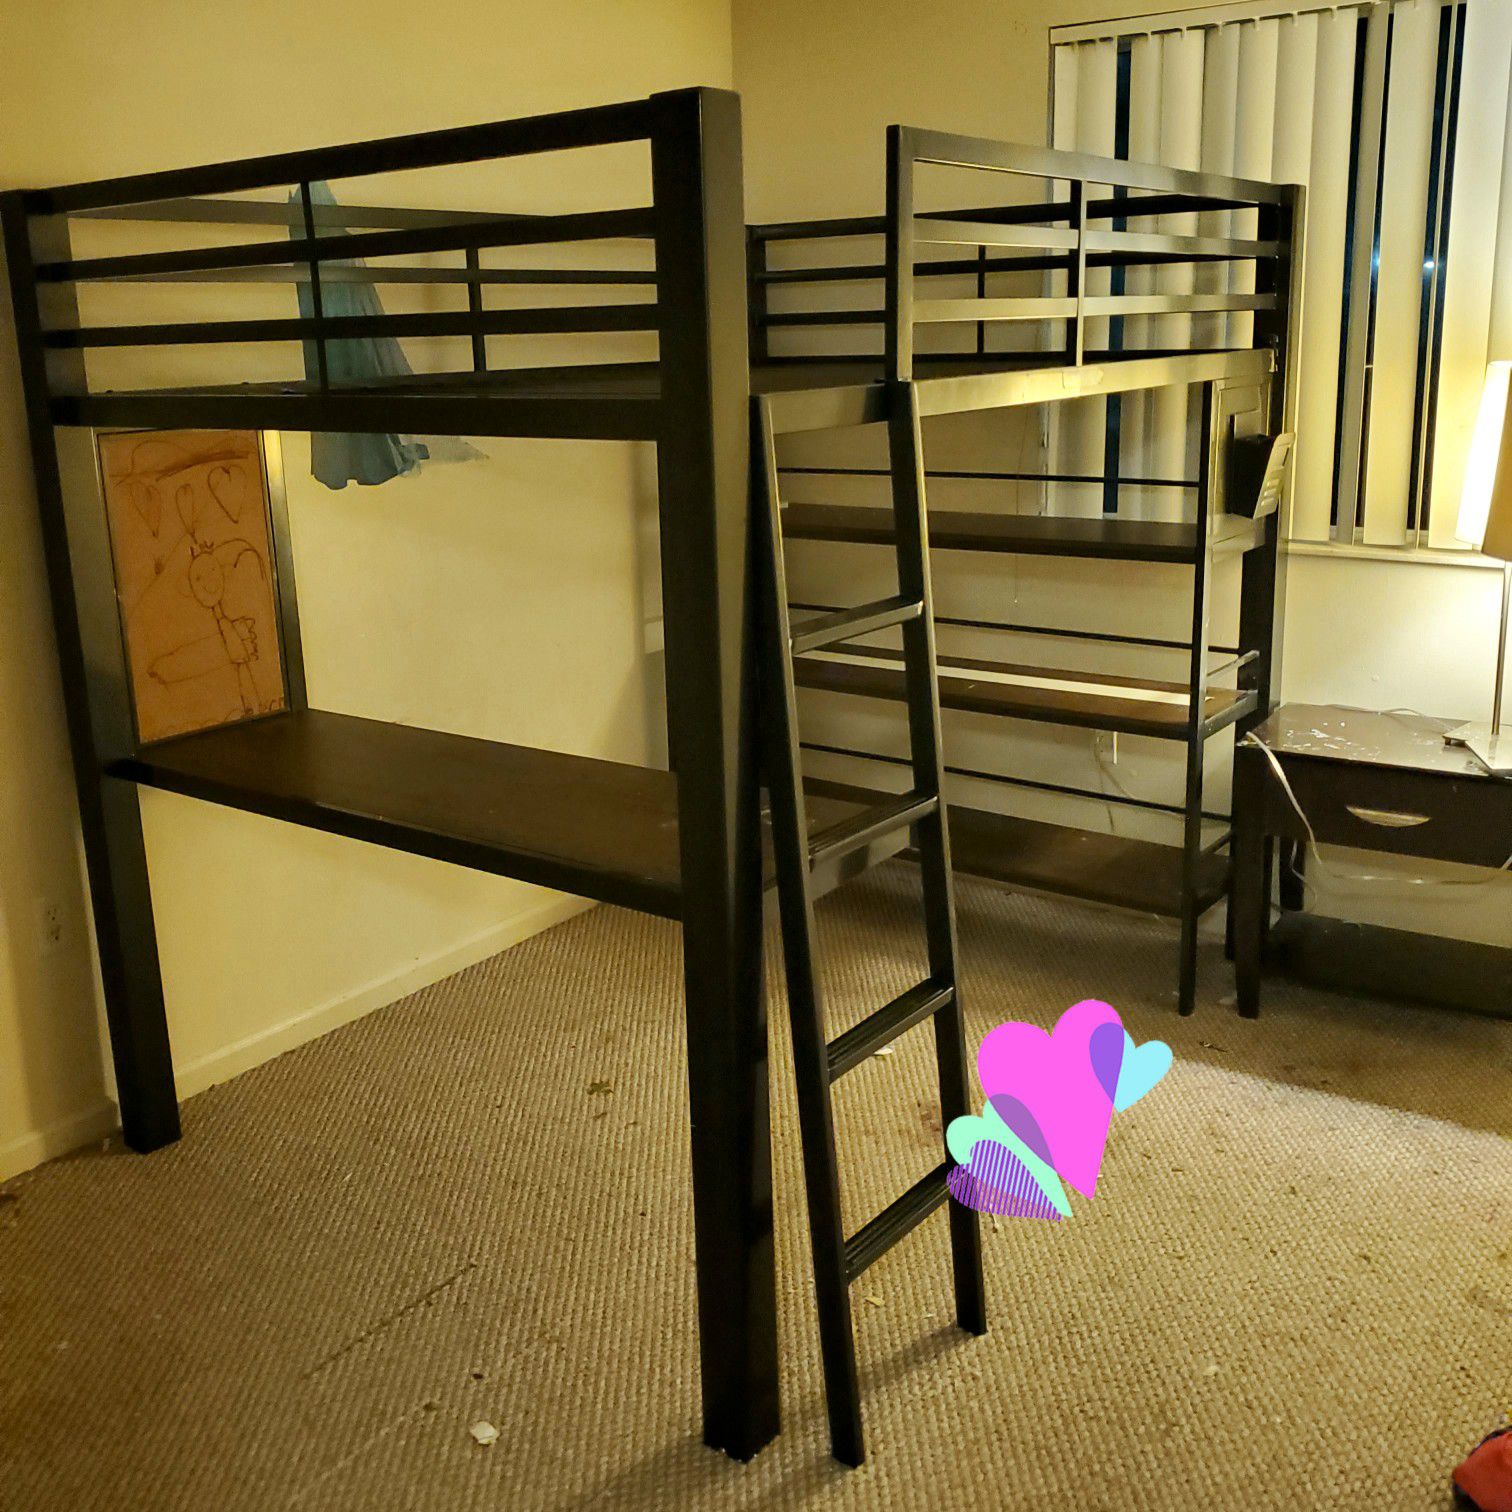 Used bunk bed with desk and bookshelves $400 or best offer